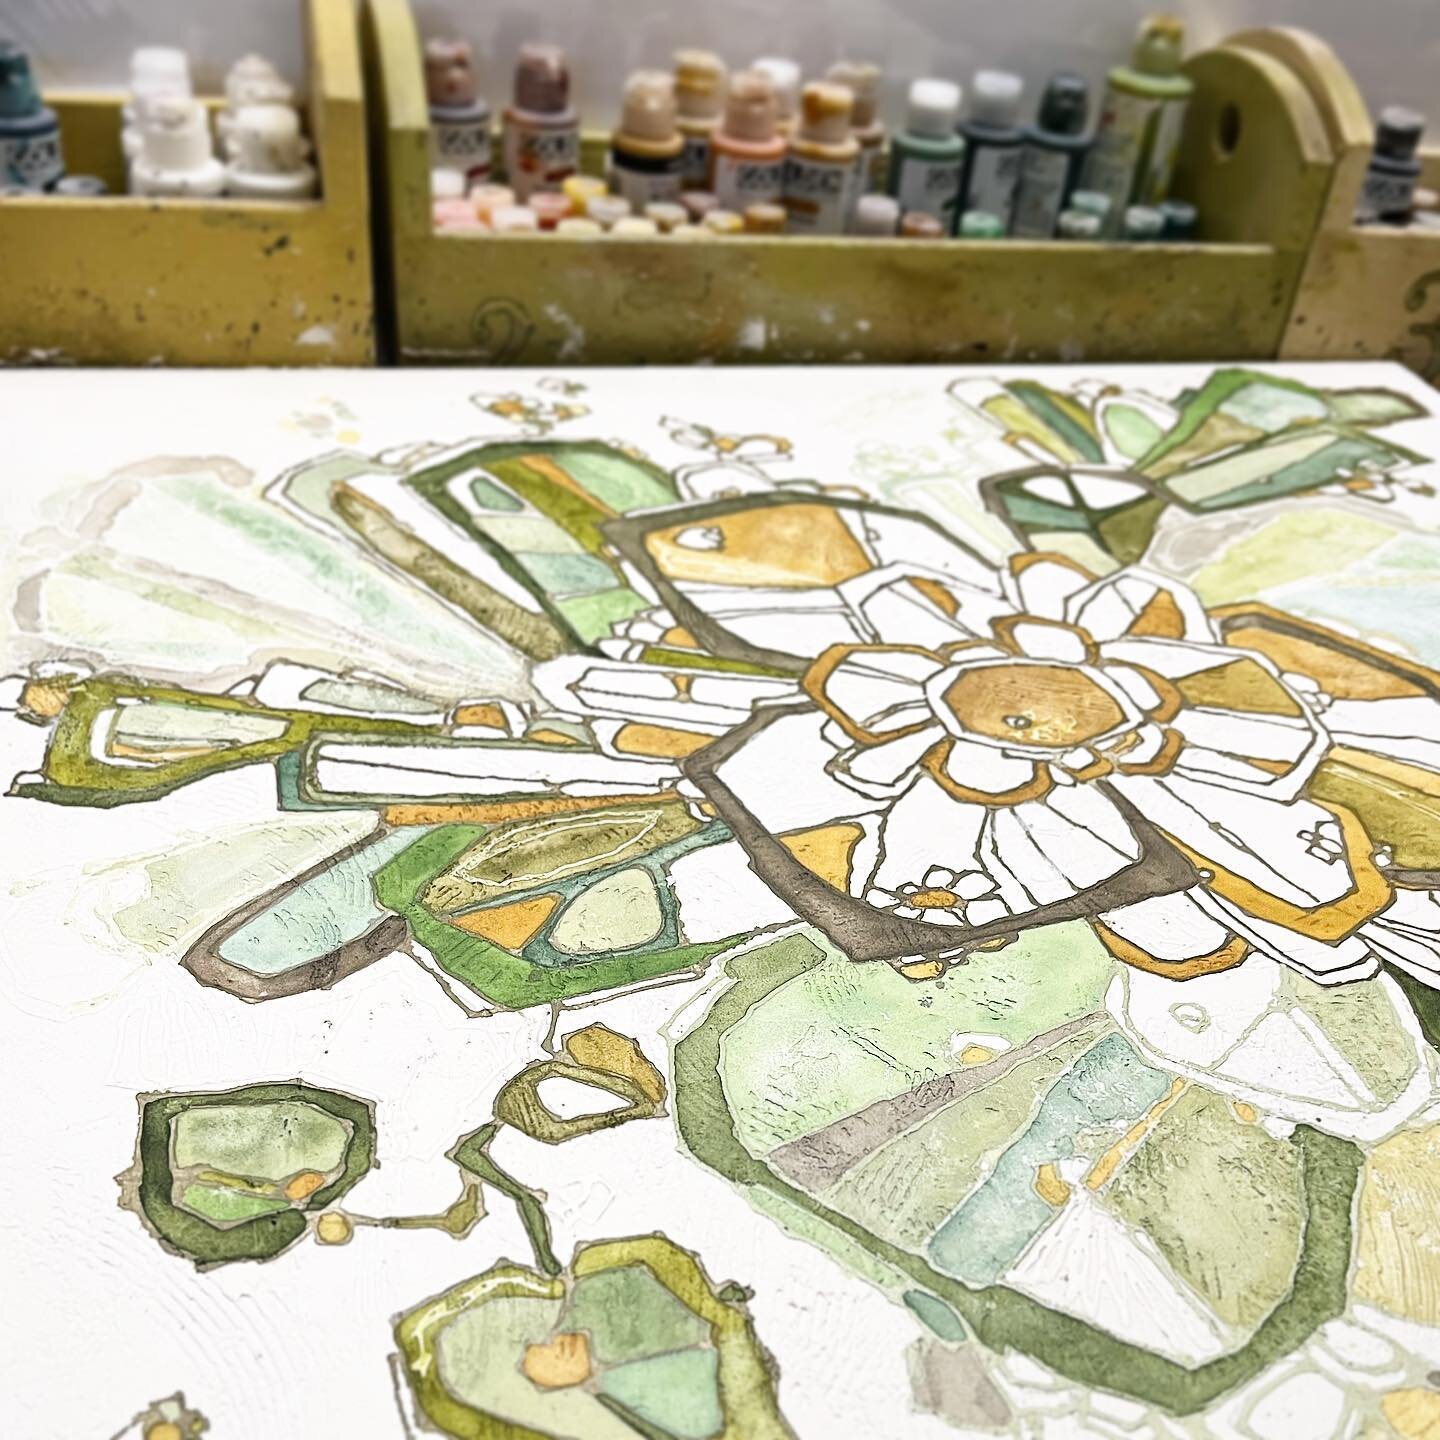 It may be a little warm in my studio today, but I&rsquo;m liking how this larger canvas is coming along.
&bull;
&bull;
Staying true to my love of green hues, the time spent creating this new botanical painting has been blissful. 
&bull;
&bull;
Lookin